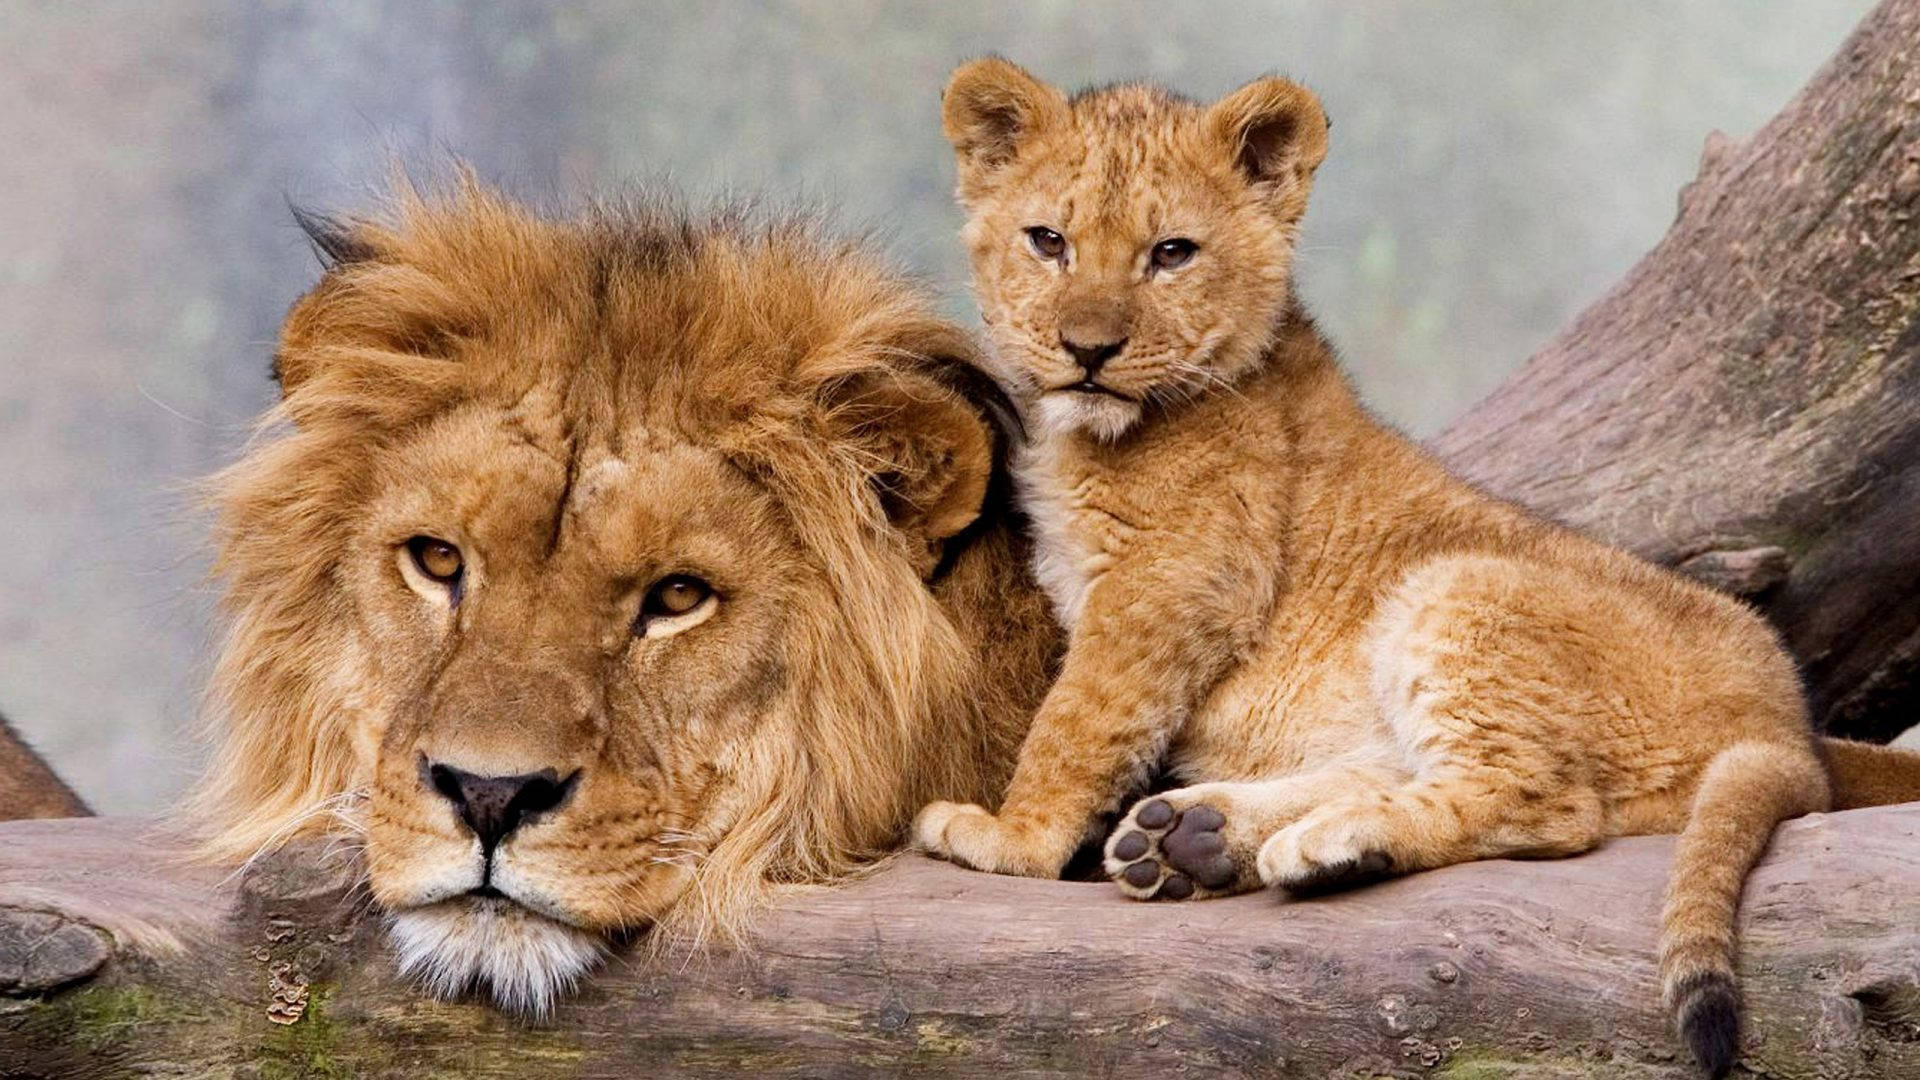 Cub Resting With Male Lion